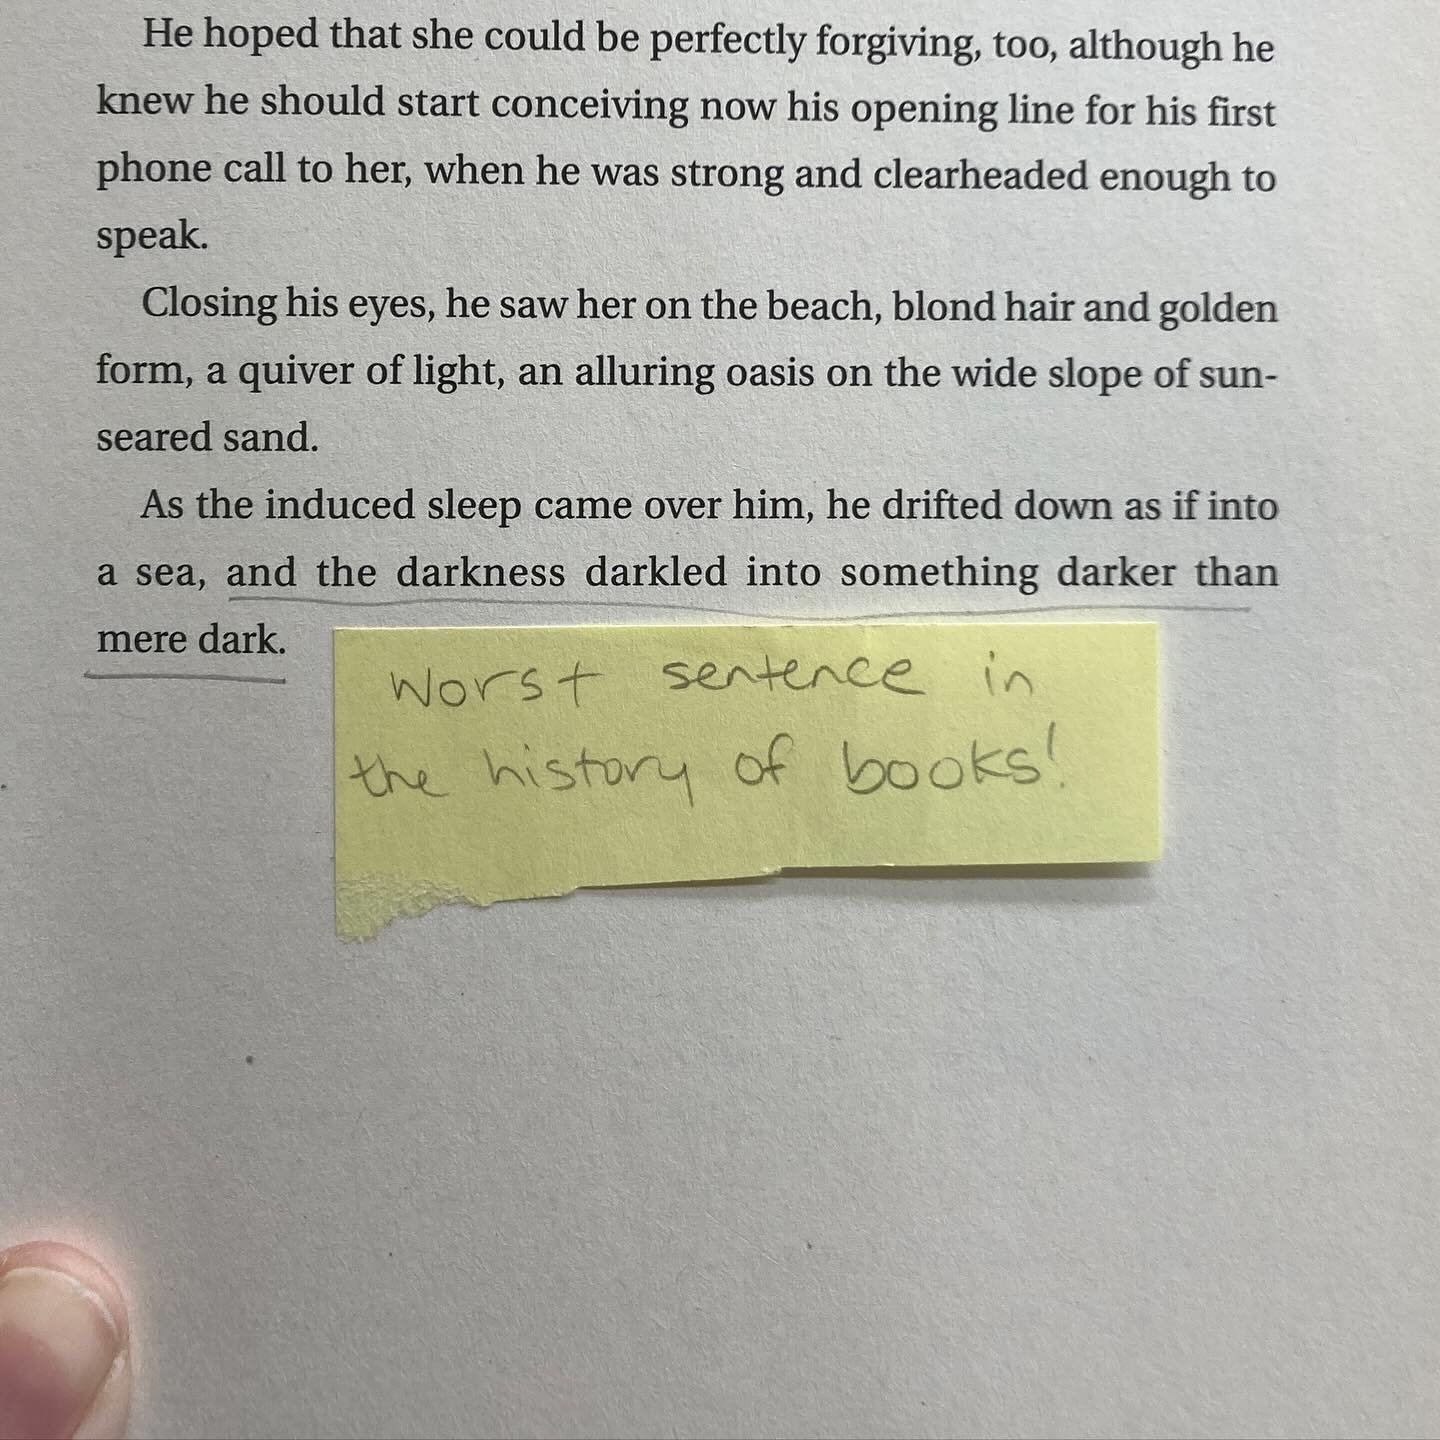 Darkled? Sorry Dean Koontz, but whoever wrote this note has a point.